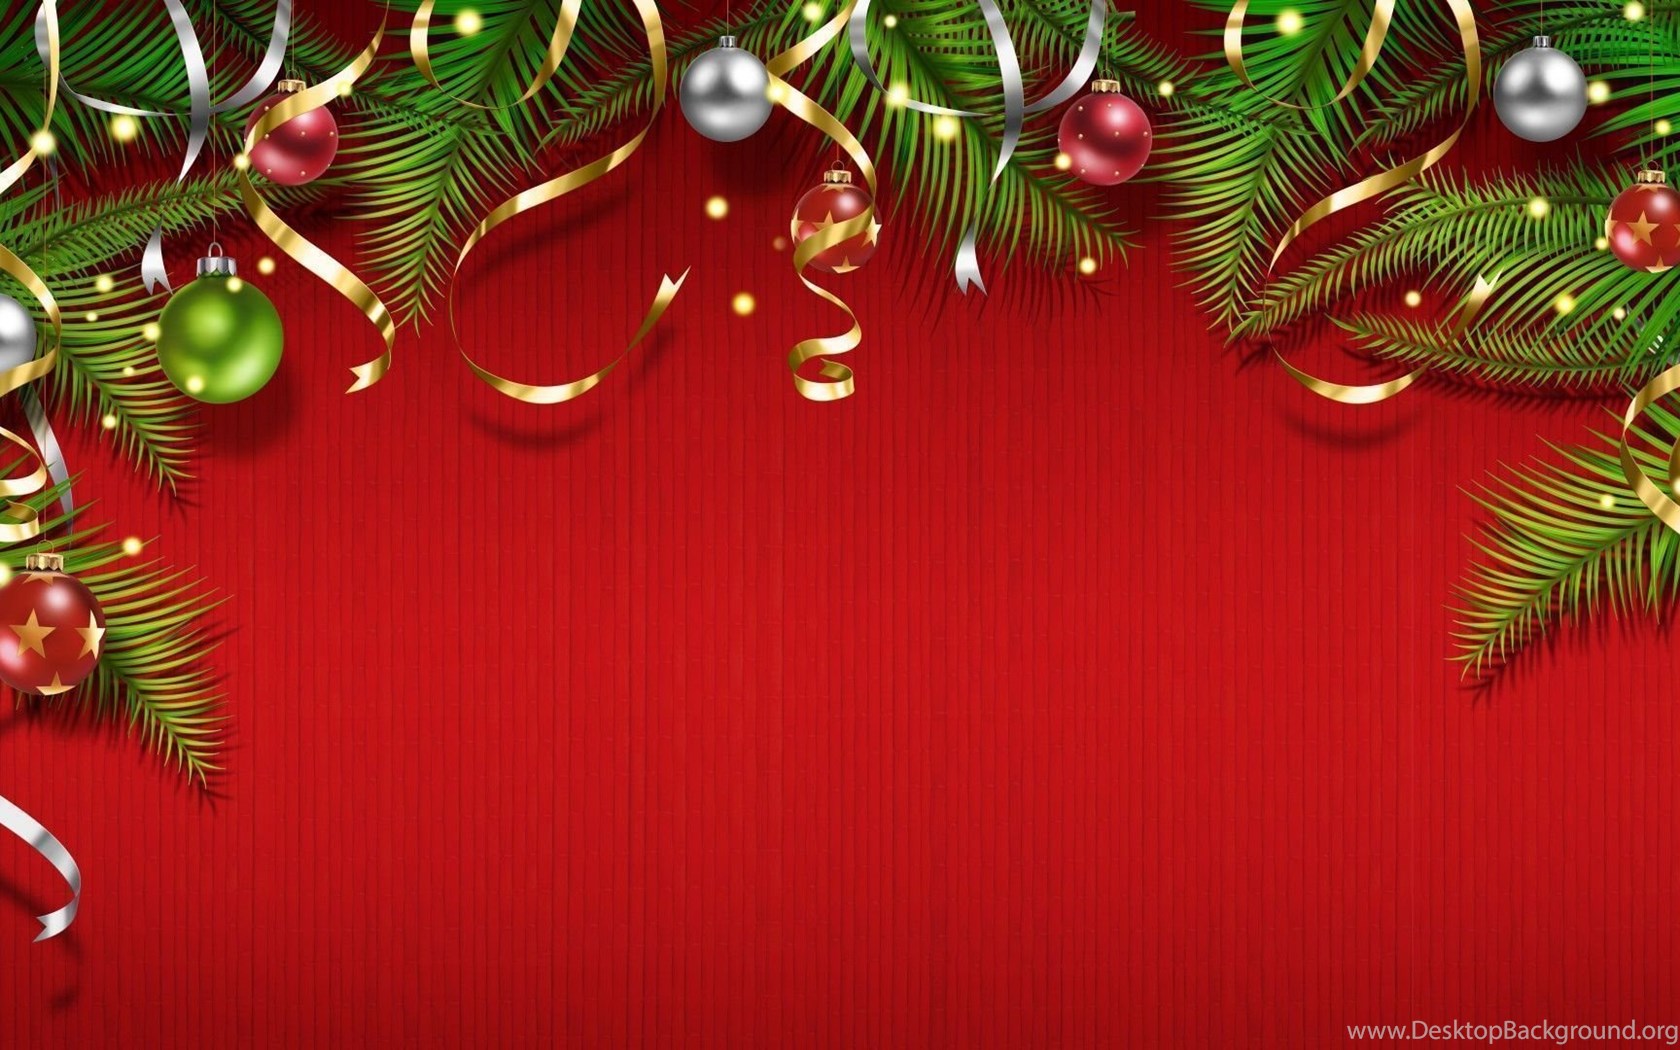 Christmas Decorations HD Wallpaper Image Of